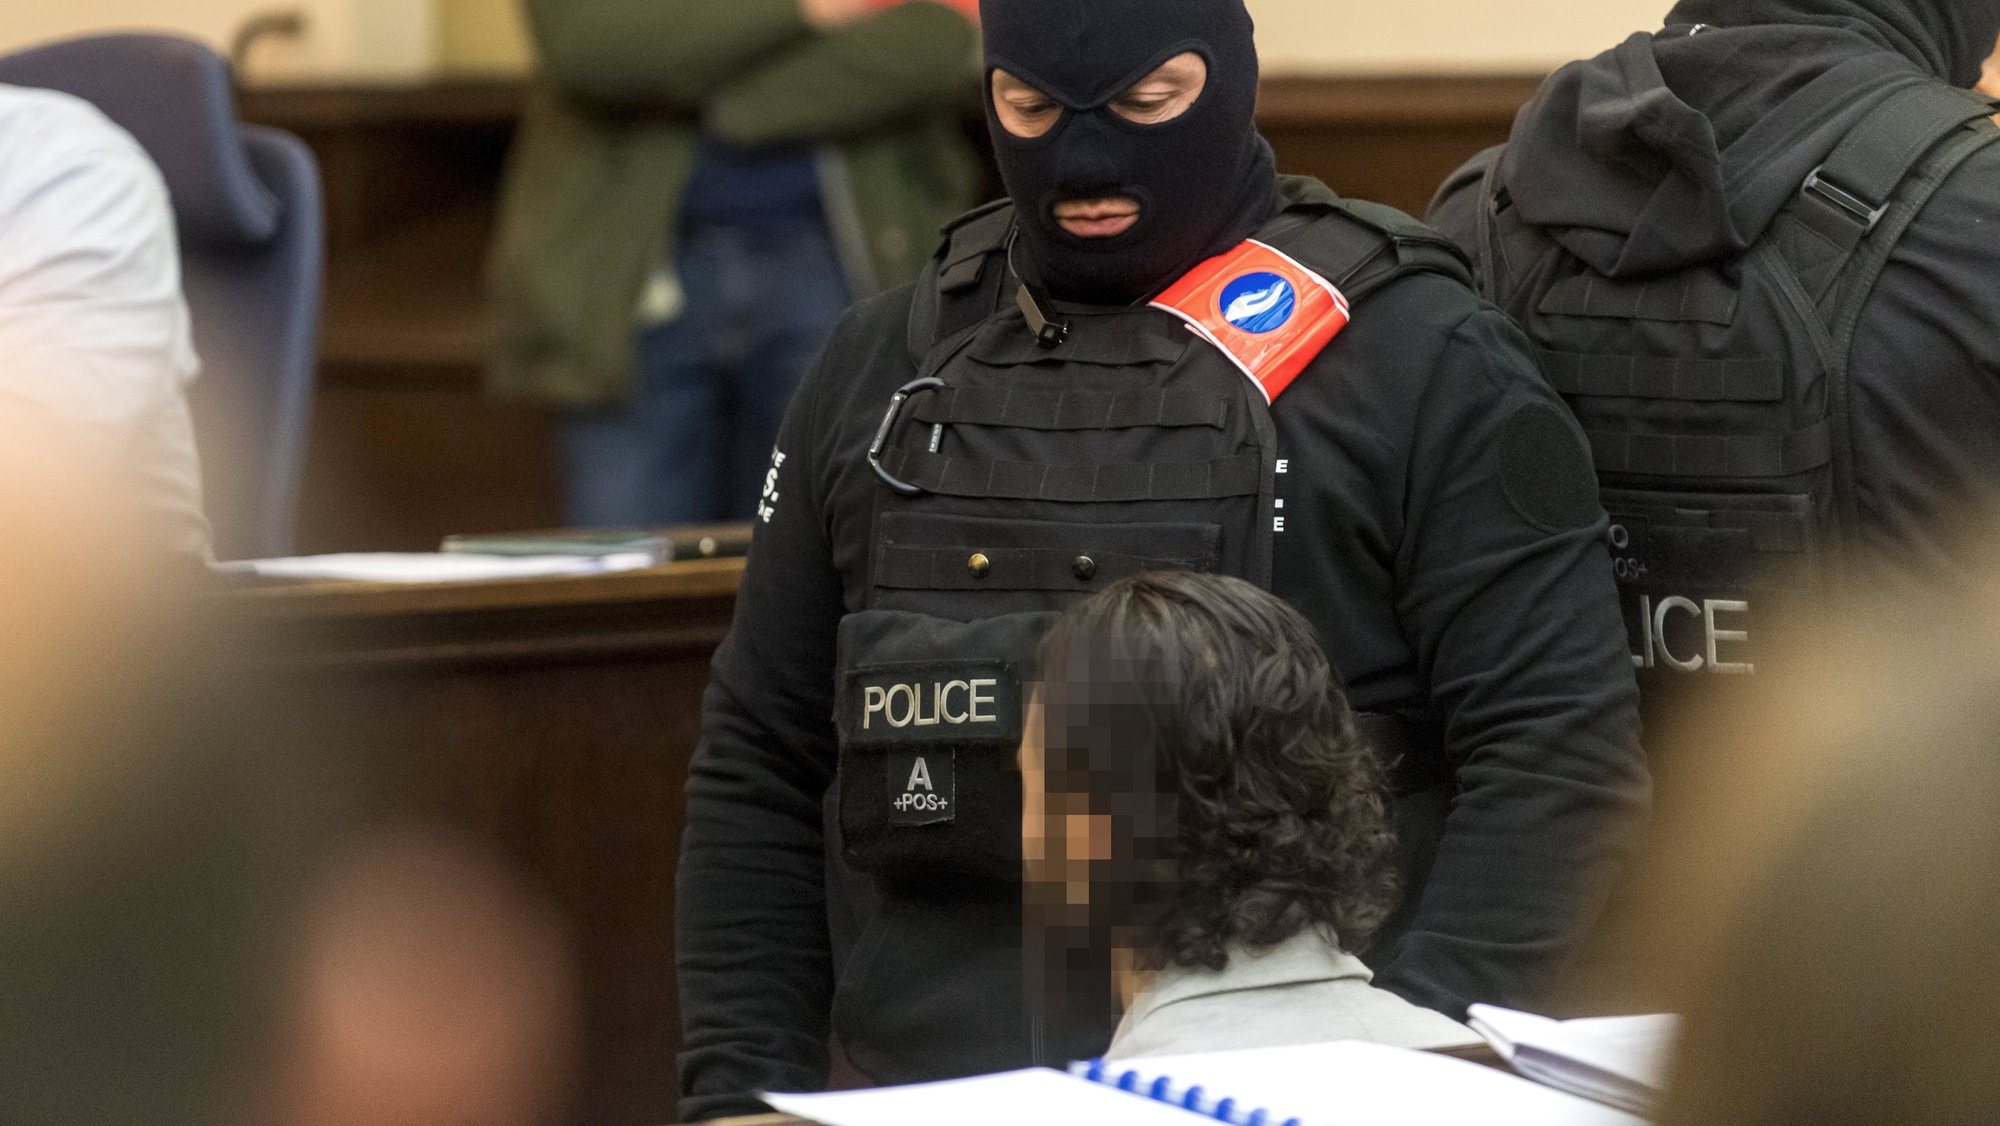 epa06497778 Prime suspect in the November 2015 Paris attacks Salah Abdeslam (R) sits as he is surrounded by Belgian special police officers  in the courtroom prior to the opening of the trial of terror suspects Salah Abdeslam and Sofiane Ayari, also known as Amine Choukri, in Brussels, Belgium, 05 February 2018. Terrorist suspects Salah Abdeslam and Sofiane Ayari are on trial for attempted murder of police searching for suspects of the November 2015 Paris terror attacks that left 130 people dead, when Abdeslam was on the run and hiding in the Belgian capital. Abdeslam allegedly escaped a shootout with Belgian police in March 2016 during which he wounded four officers but was captured and arrested some days later in downtown Brussels. The trial in Belgium only deals with the shootout prior to the arrest. His role in the Paris terrorist attacks will be tried in a court in France at a later stage.  EPA/DANNY GYS / POOL